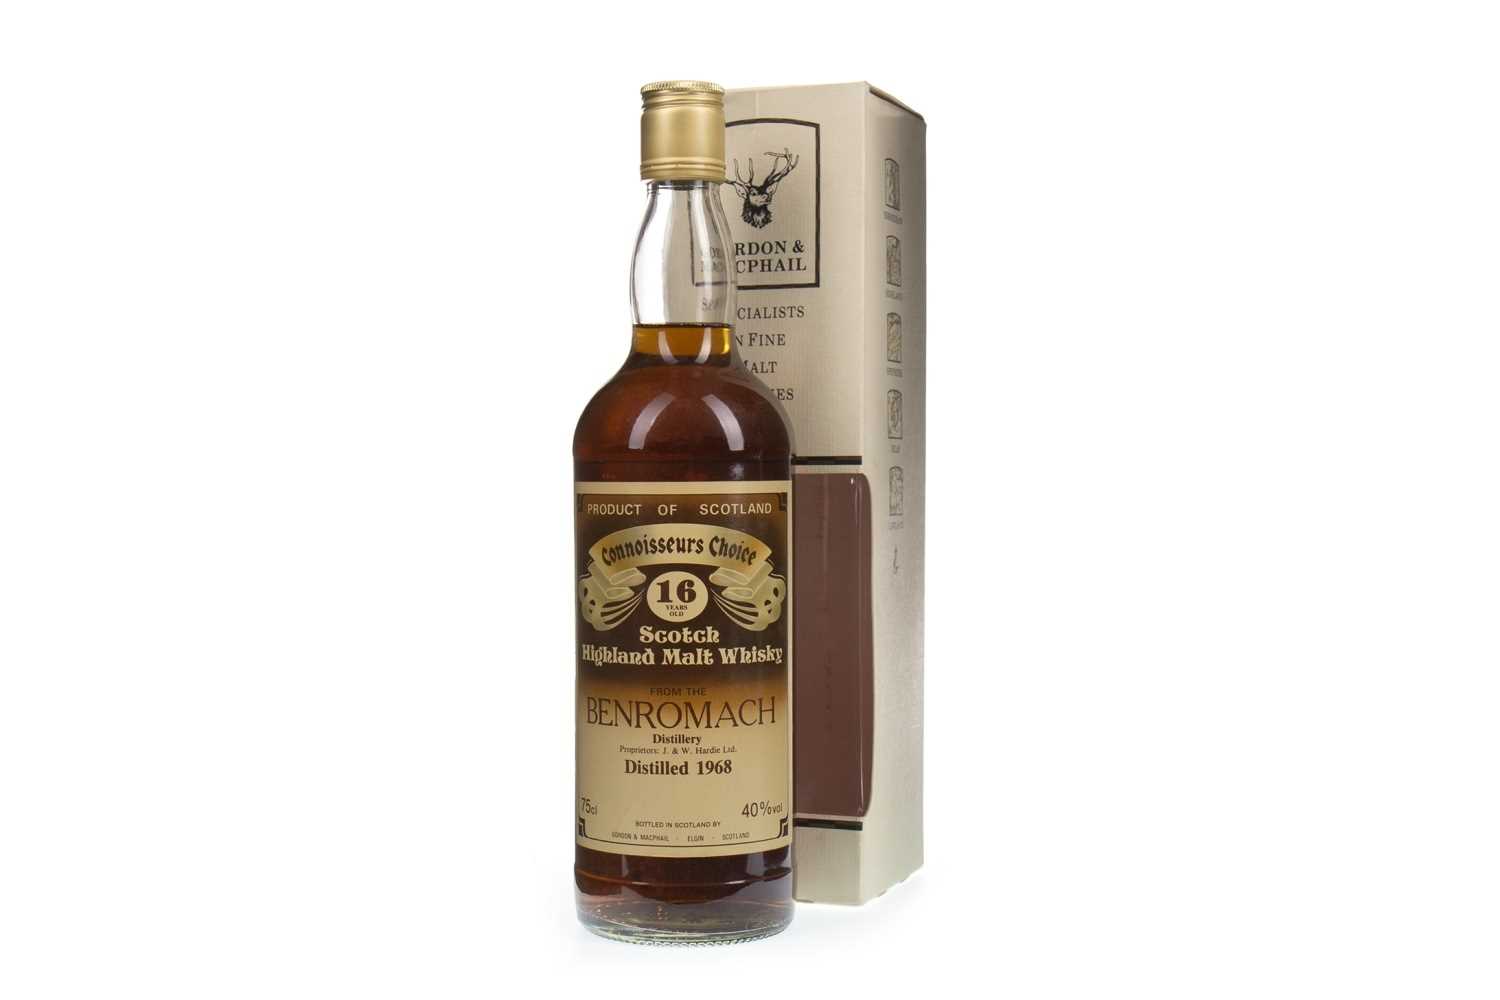 Lot 6 - BENROMACH 1968 CONNOISSEURS CHOICE 16 YEARS OLD